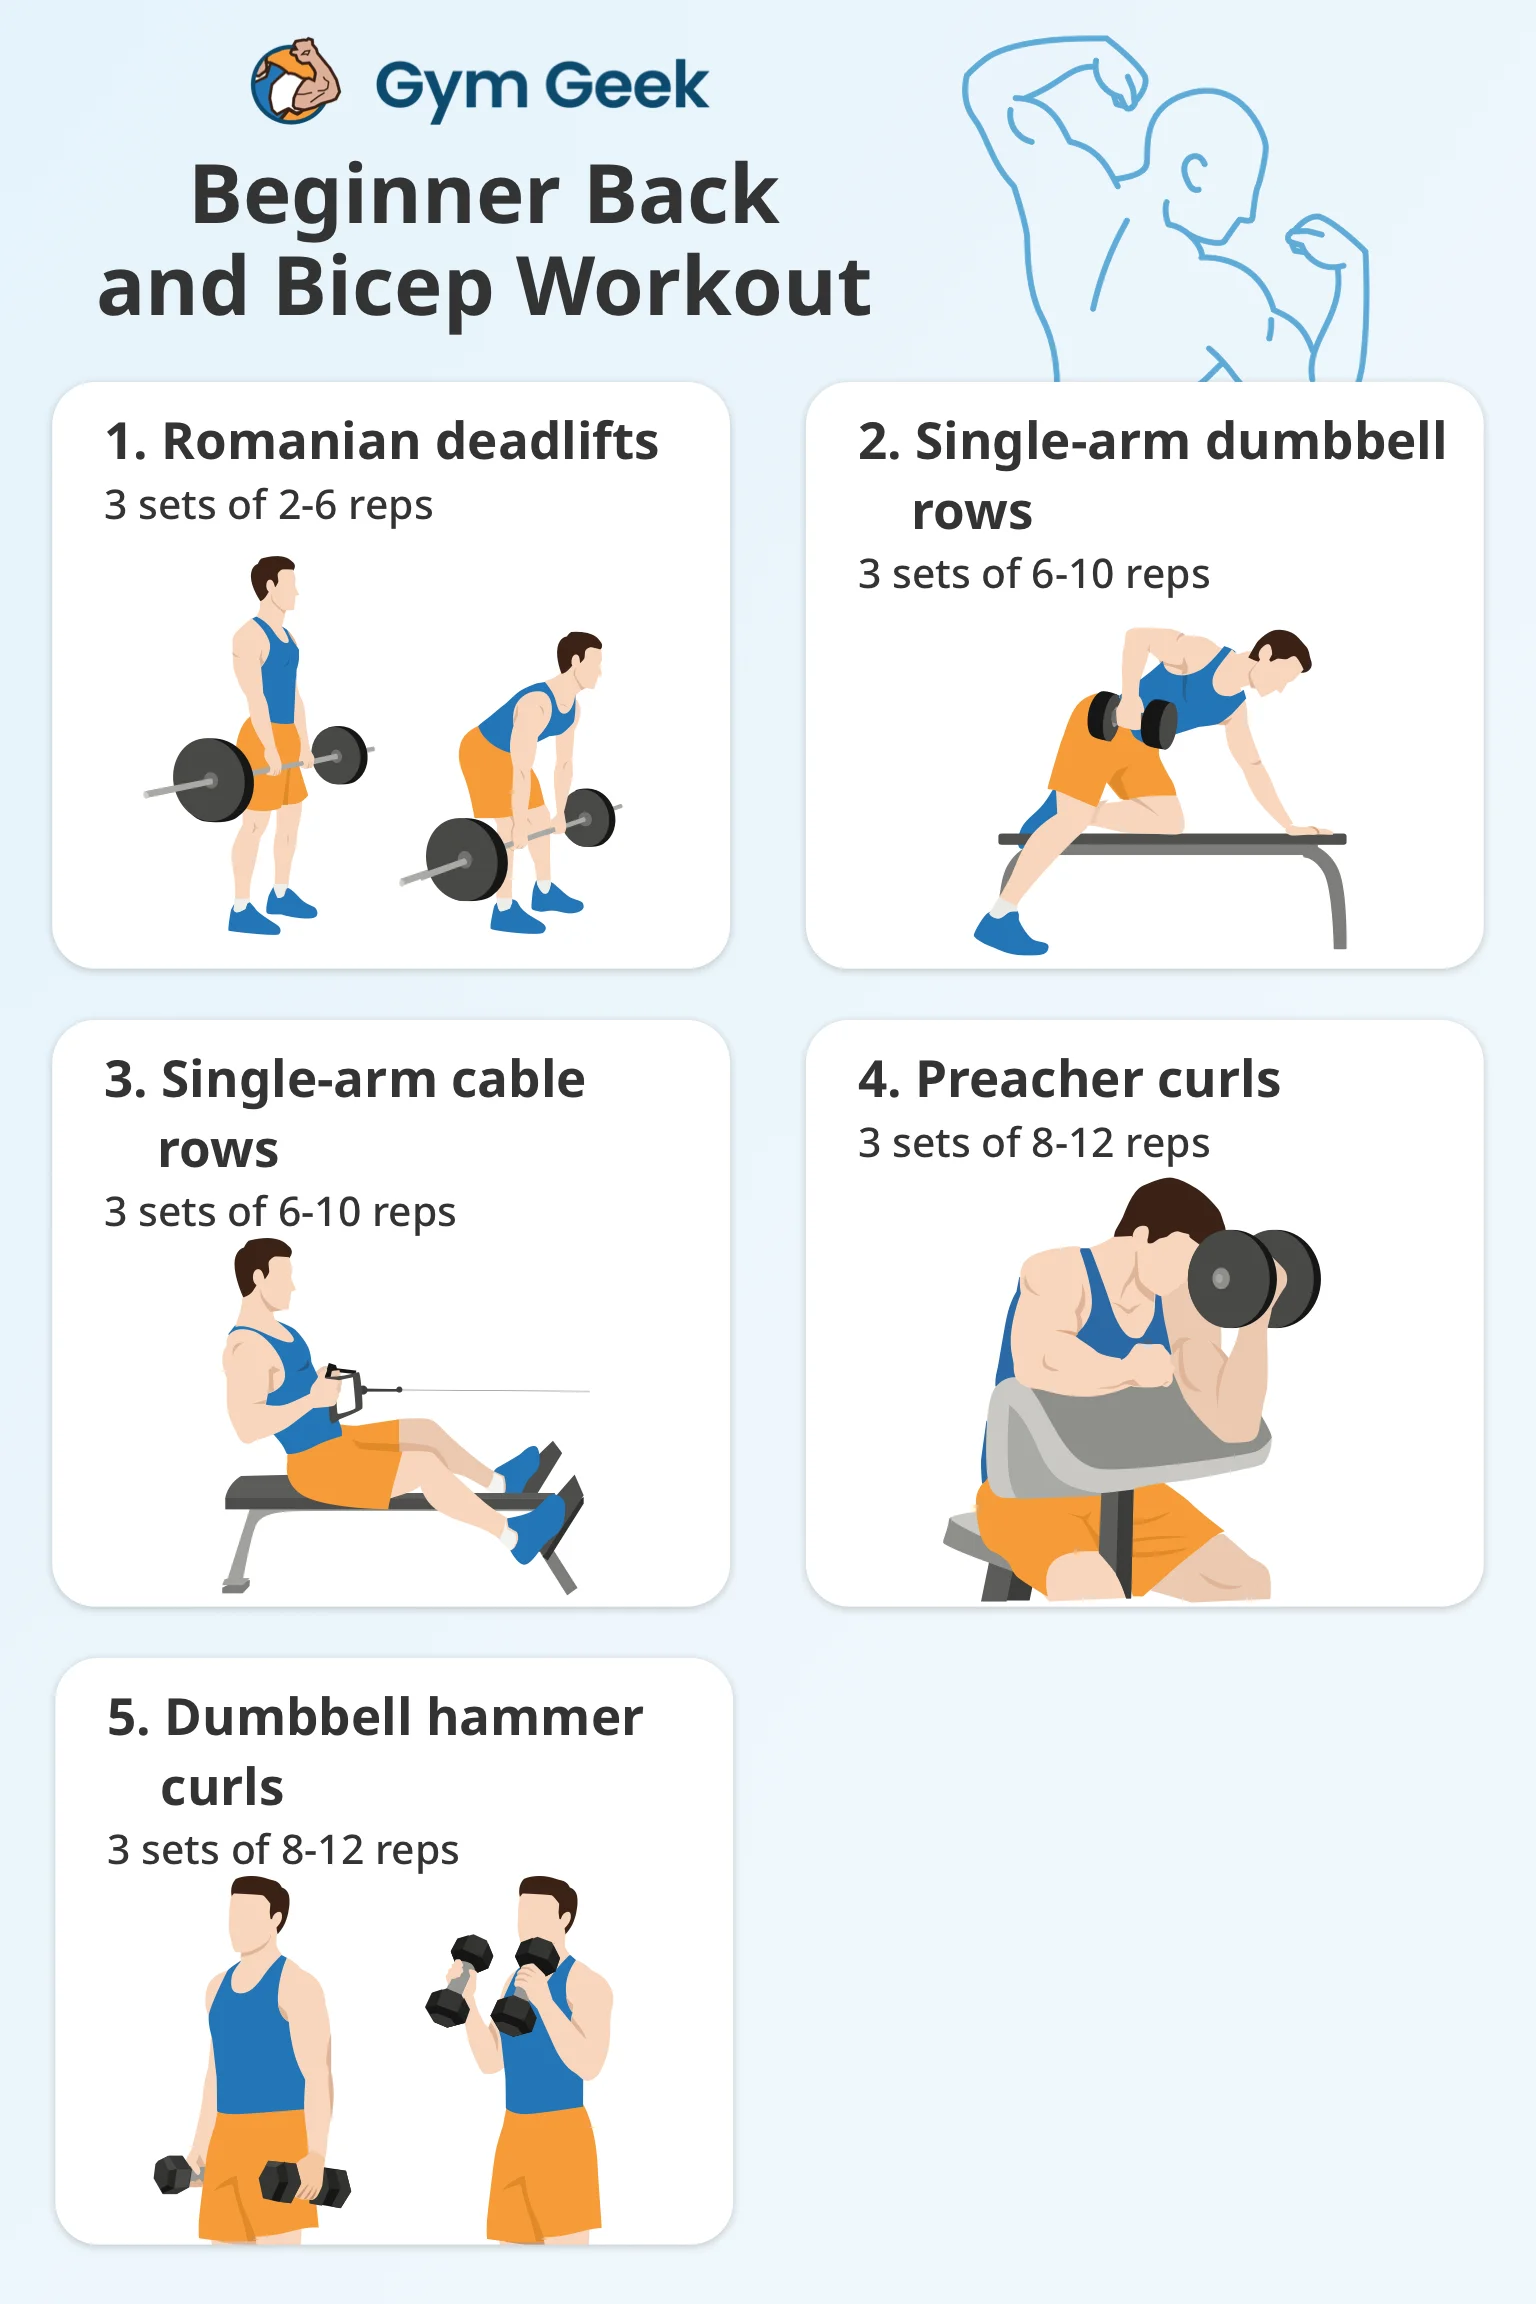 infographic - Beginner back and bicep workout routine (5 exercises)